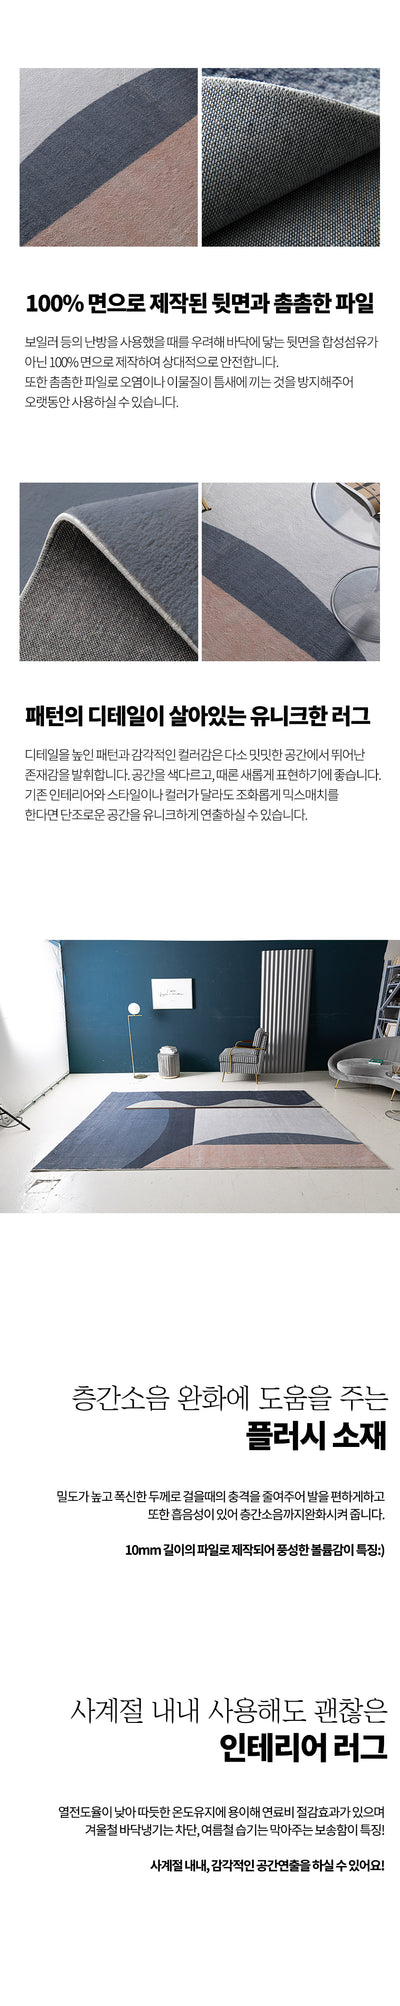 And Wave interior rug